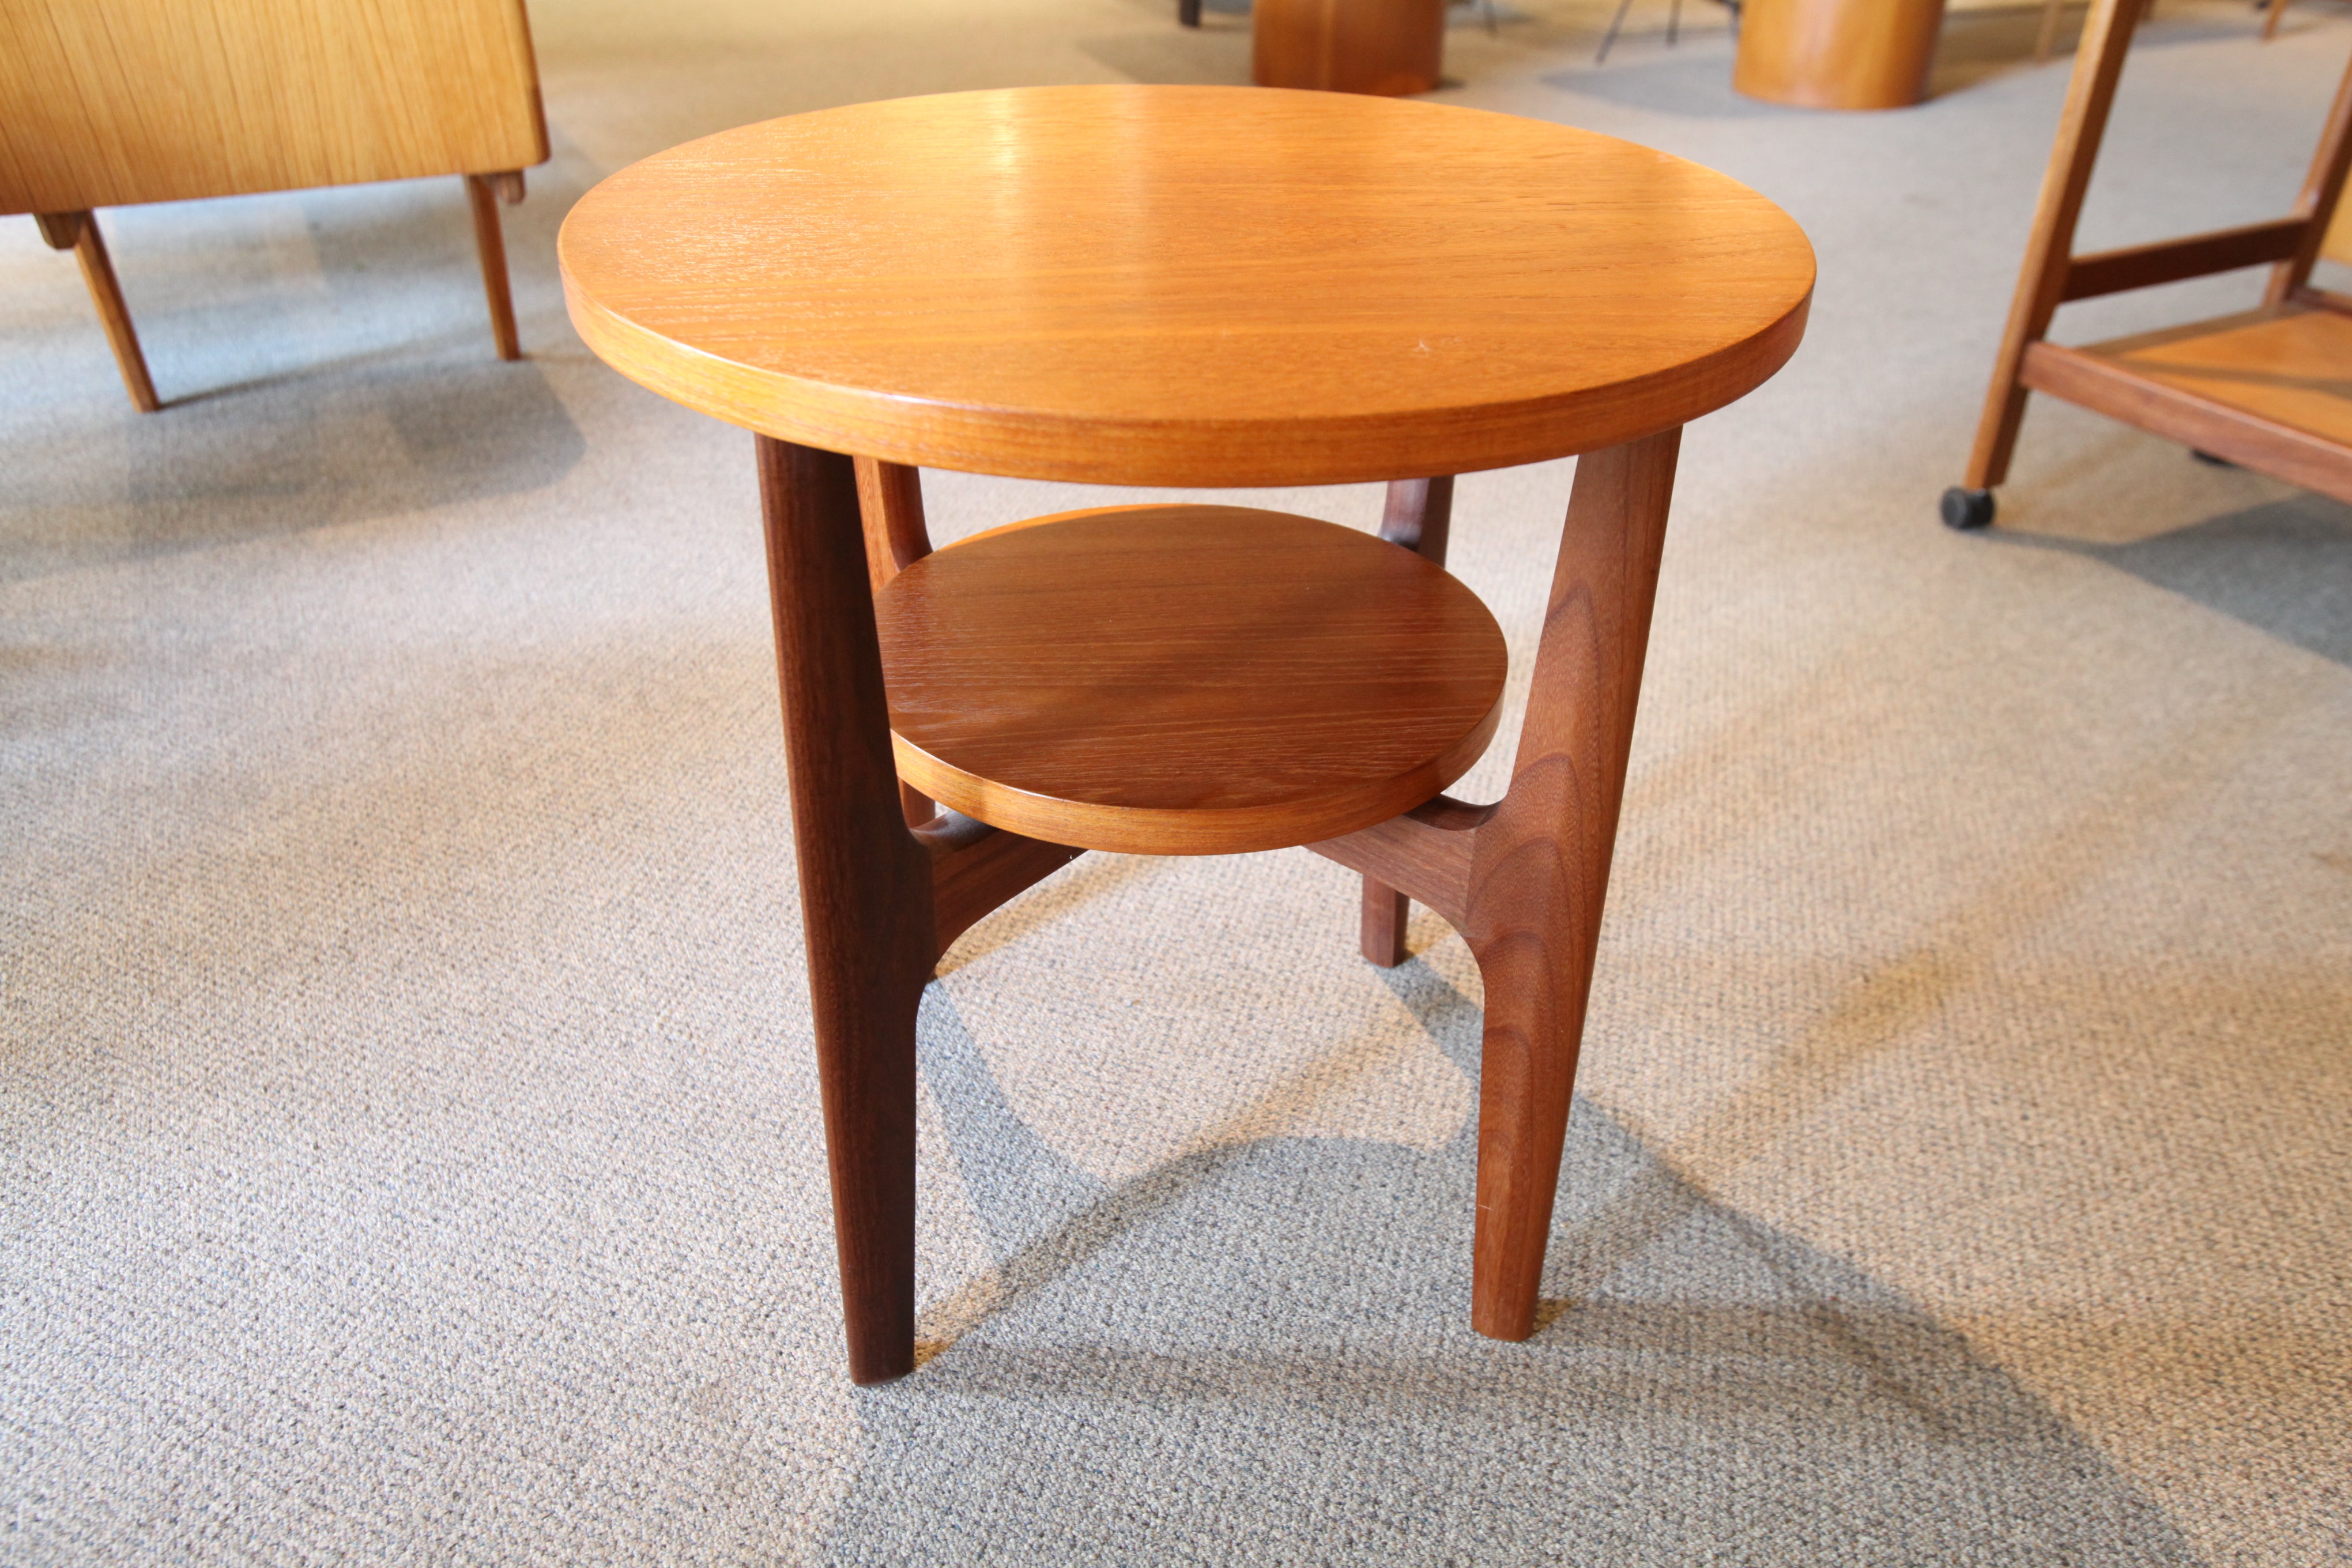 RS Associates Montreal Round Teak Side Table (20.25"W x 21"H)